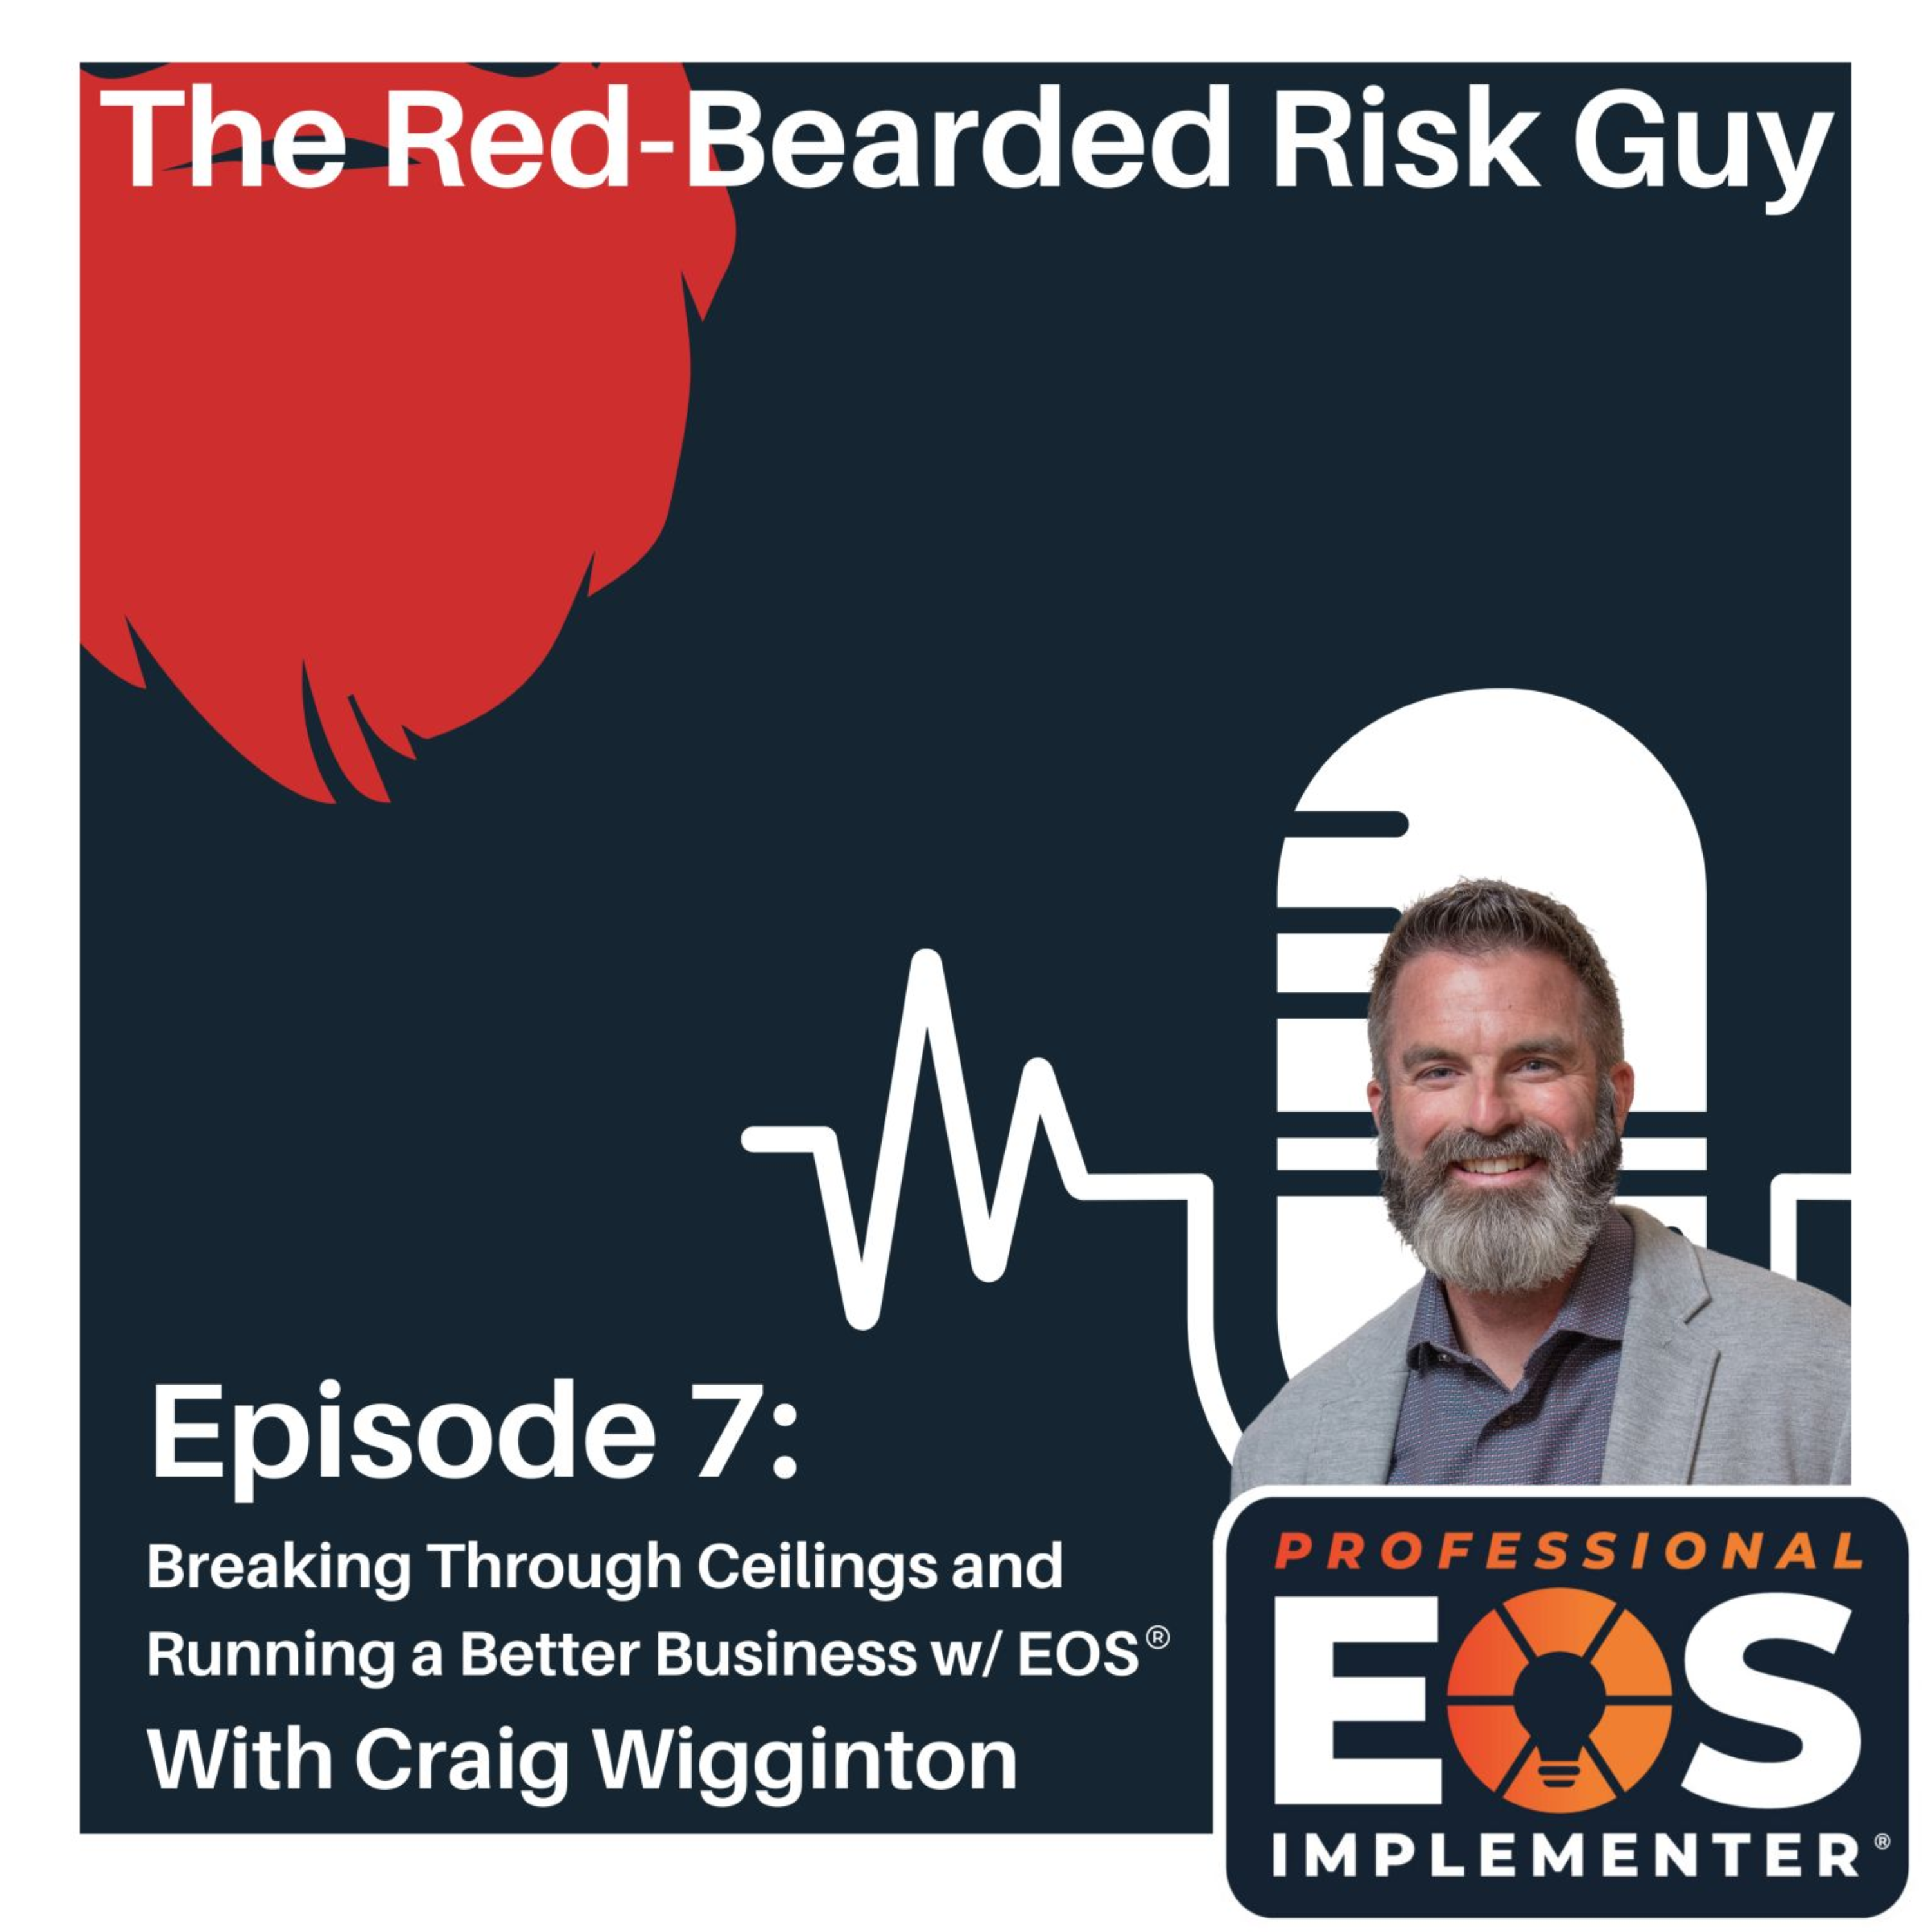 Photo of EOS Implementer Craig Wigginton. A Dark Blue Background with the outline of a red beard in the upper right corner Image of guest and guest's company logo- EOS Implementer